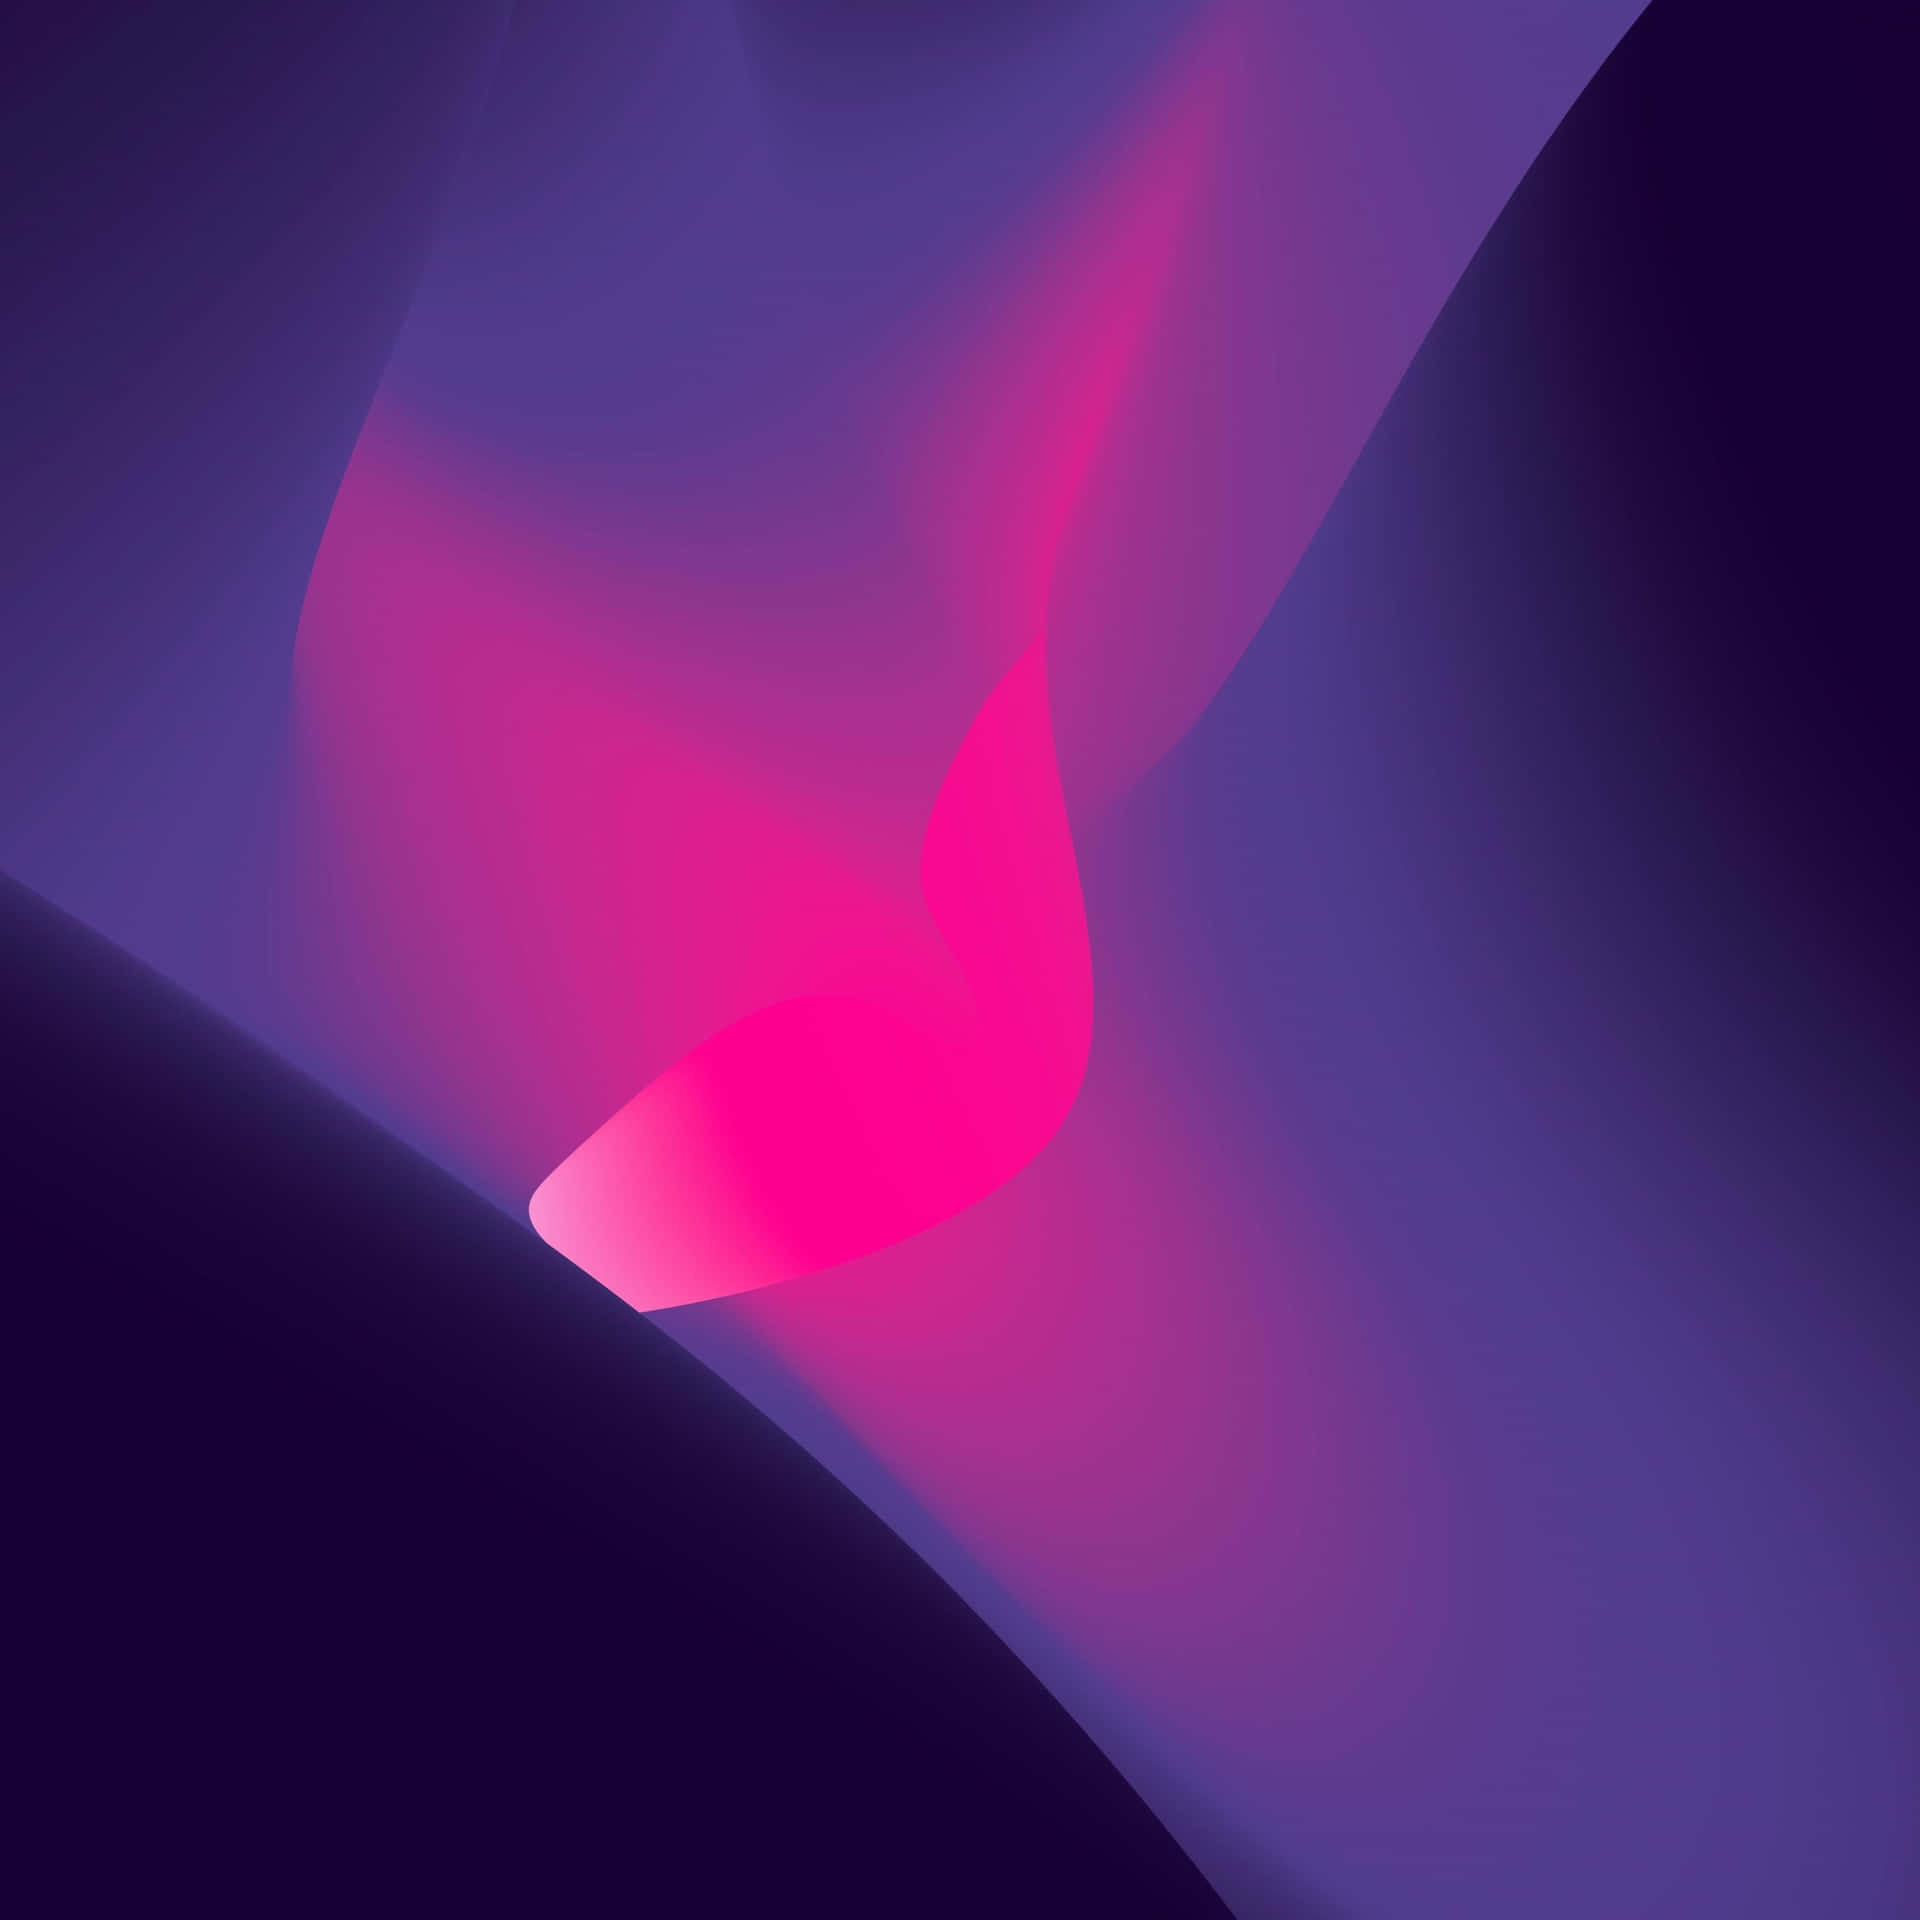 A Pink And Purple Abstract Background Wallpaper